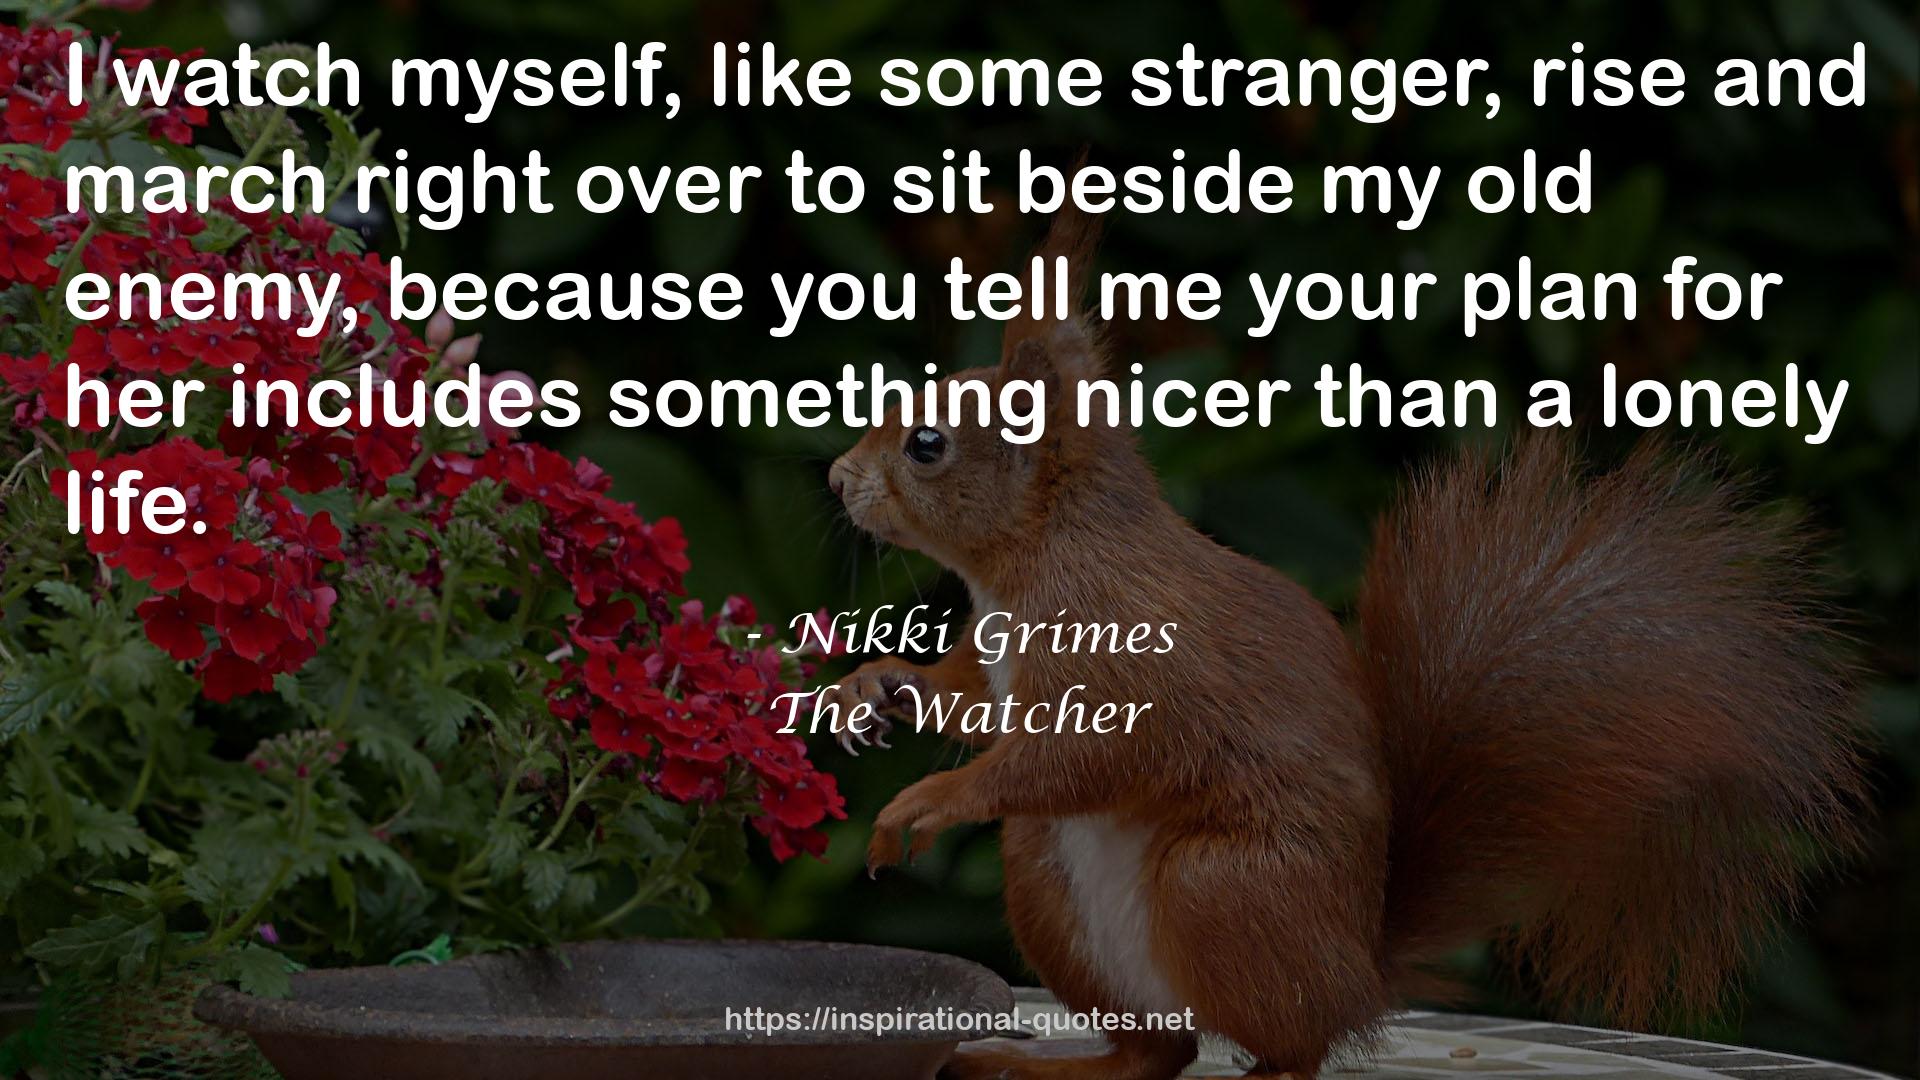 The Watcher QUOTES